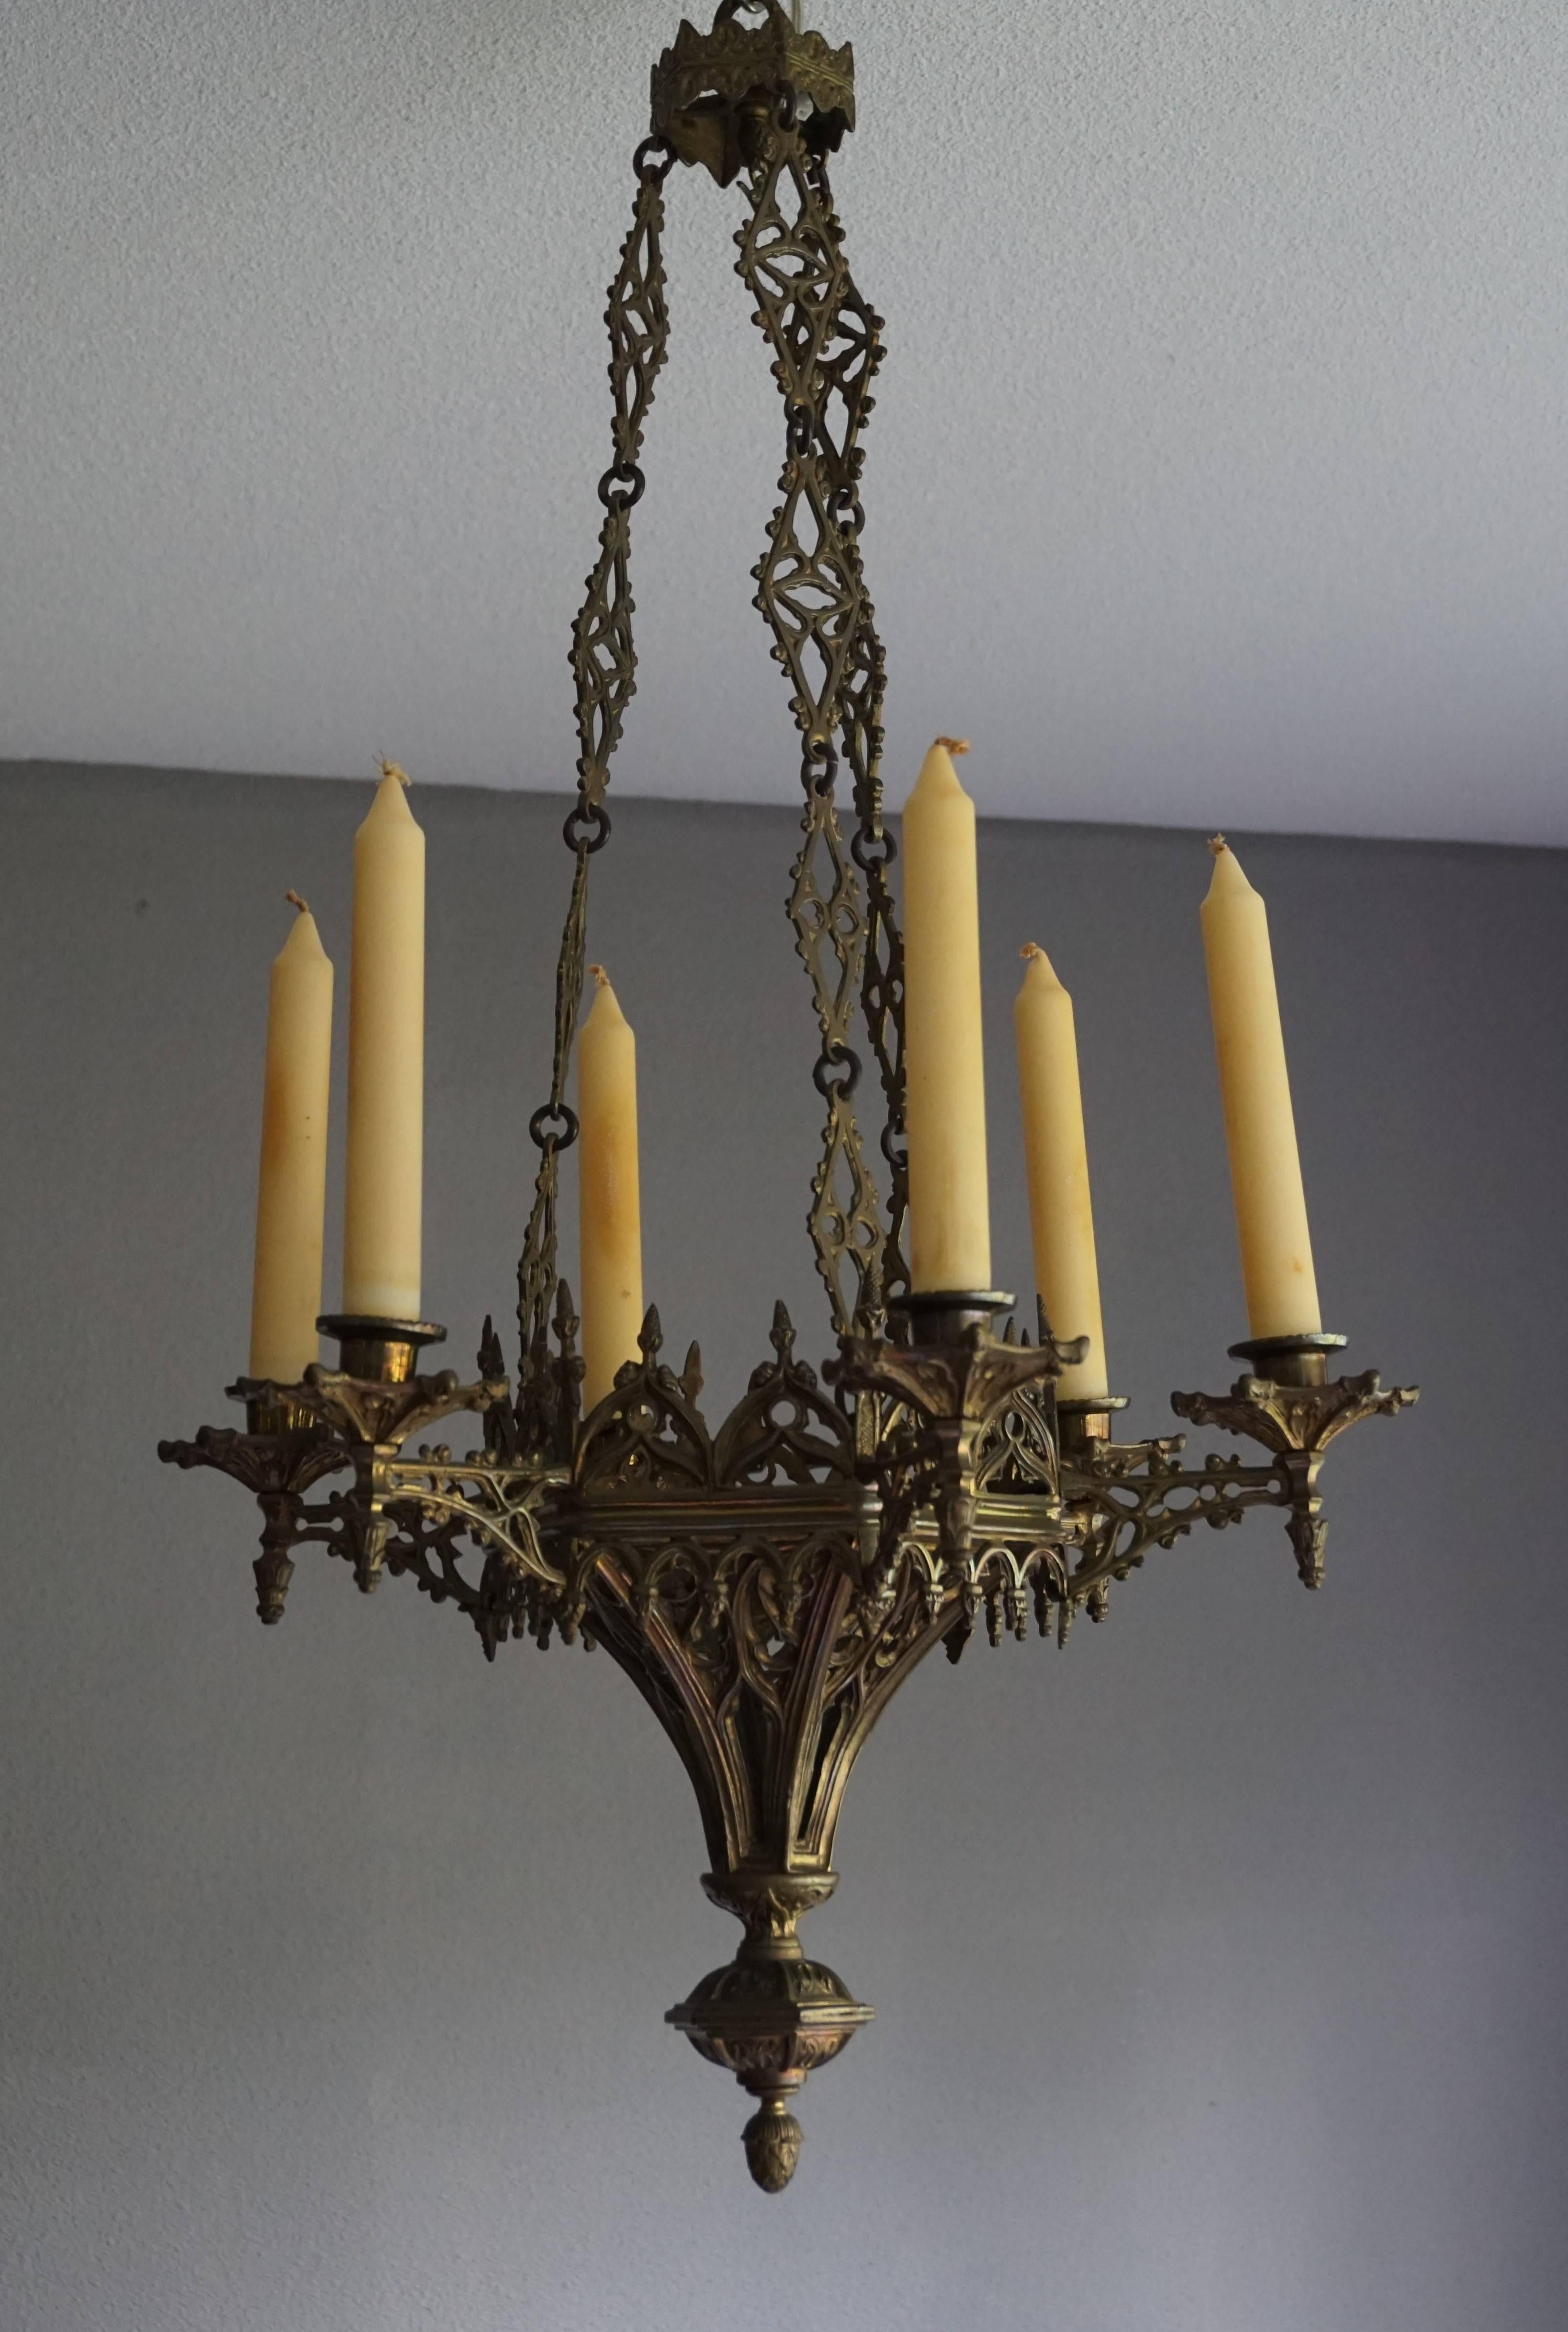 Handcrafted wonderful chandelier with a great look and feel.

The amount of work that has gone into making this striking chandelier is almost unimaginable in this day and age. Before you can start to cast the individual pieces (and there are many on